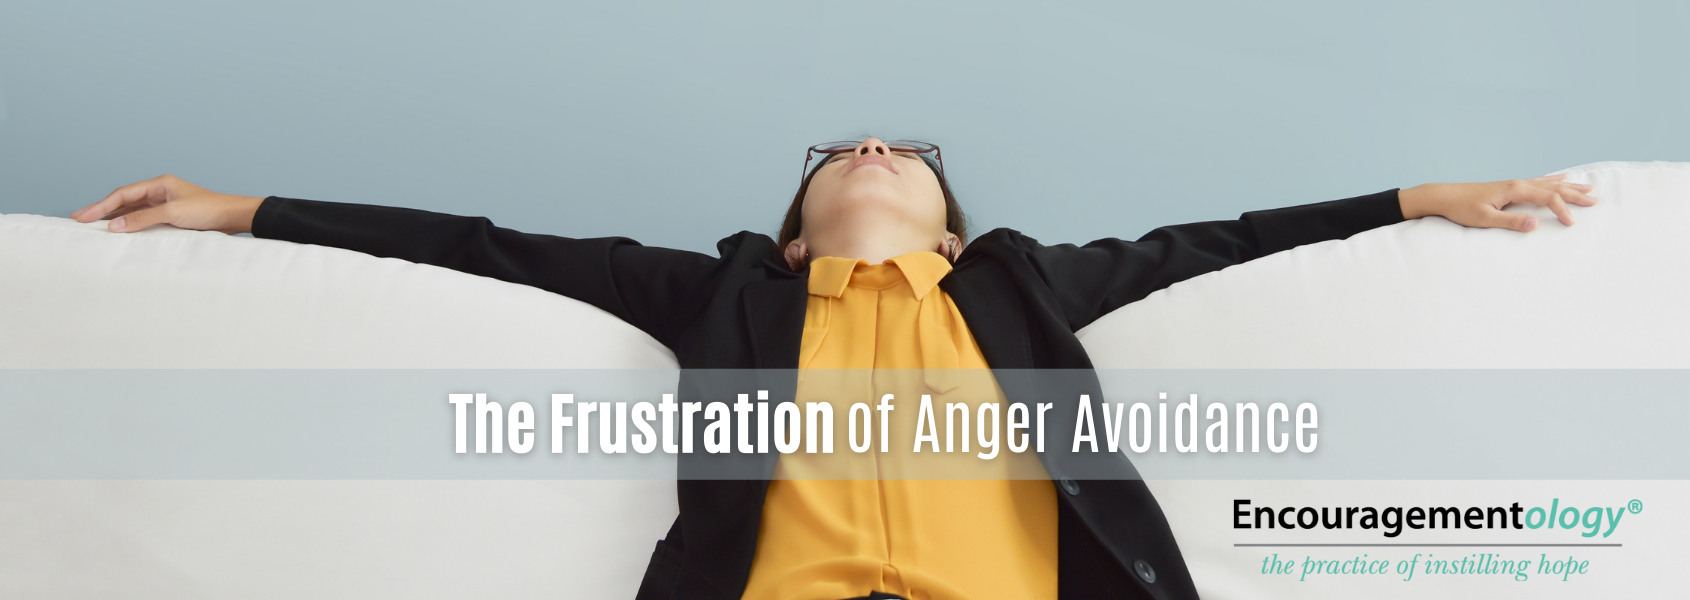 The frustration of anger avoidance